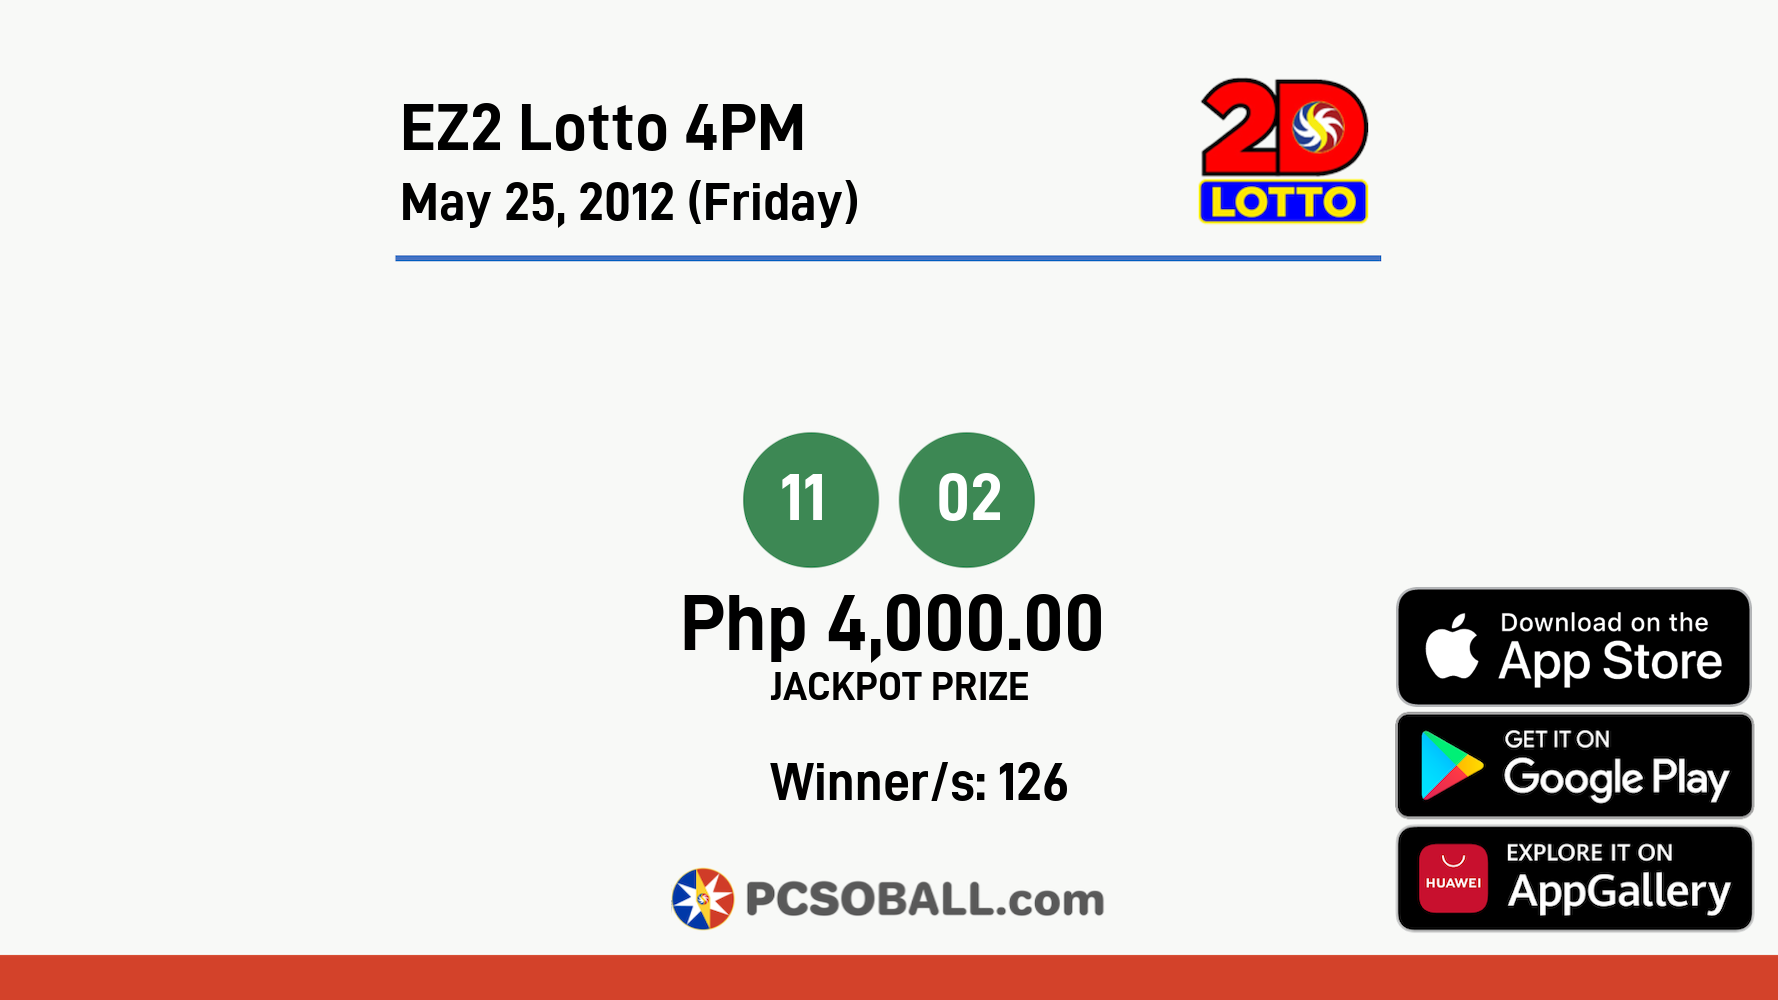 EZ2 Lotto 4PM May 25, 2012 (Friday) Result